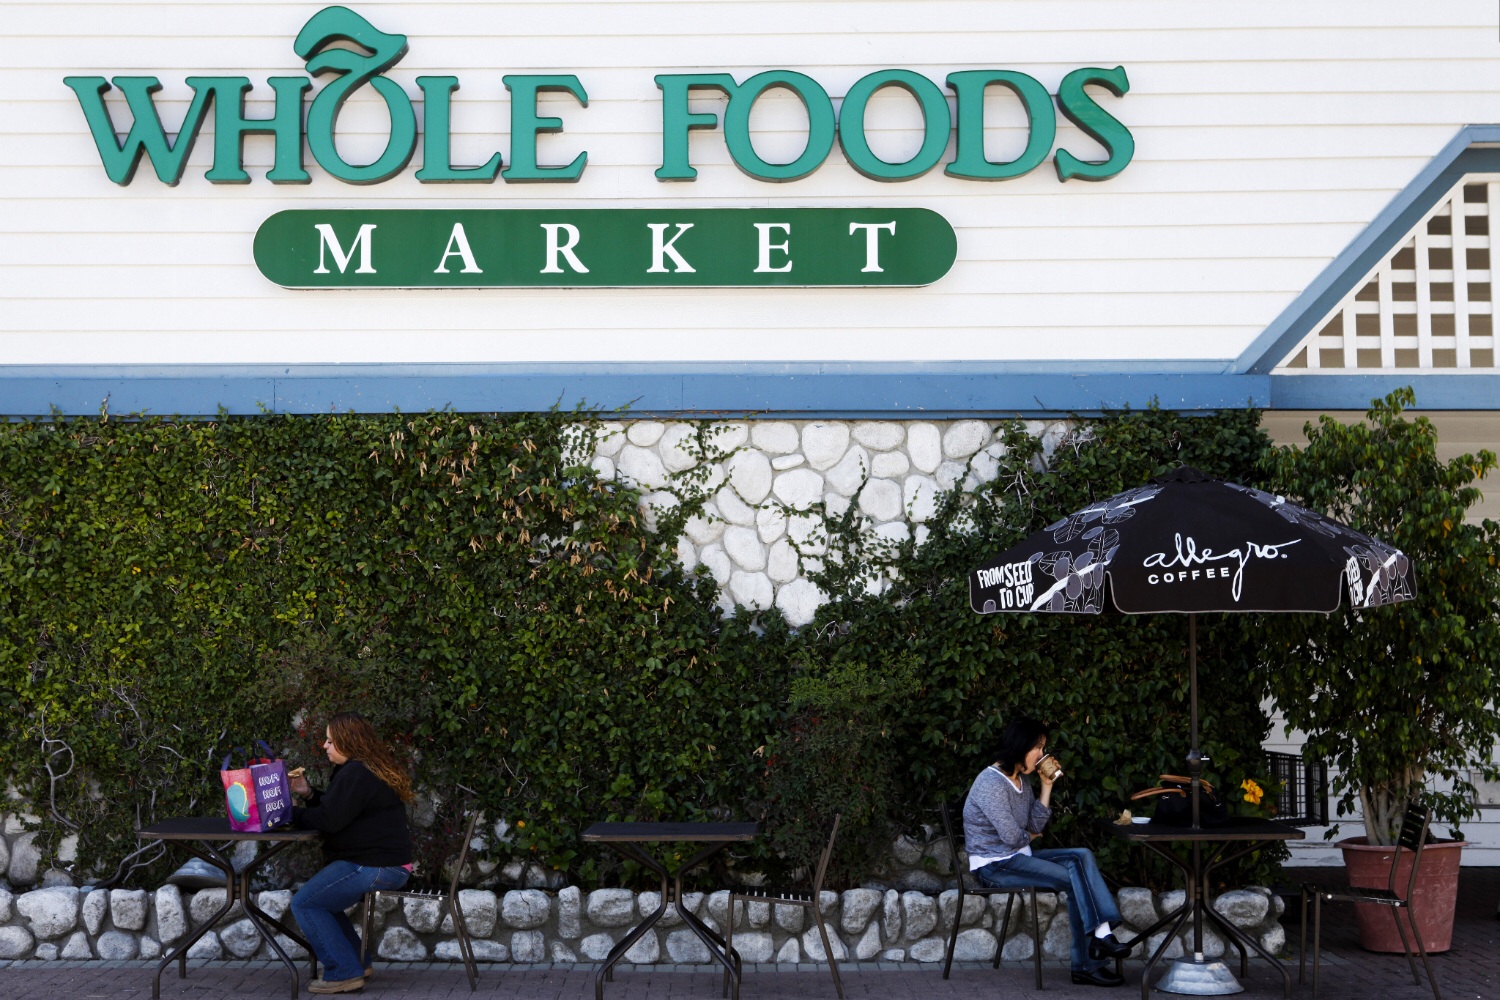 A Whole Foods Market in Redondo Beach, Calif. on November 5, 2013. (Patrick Fallon—Bloomberg/Getty Images)